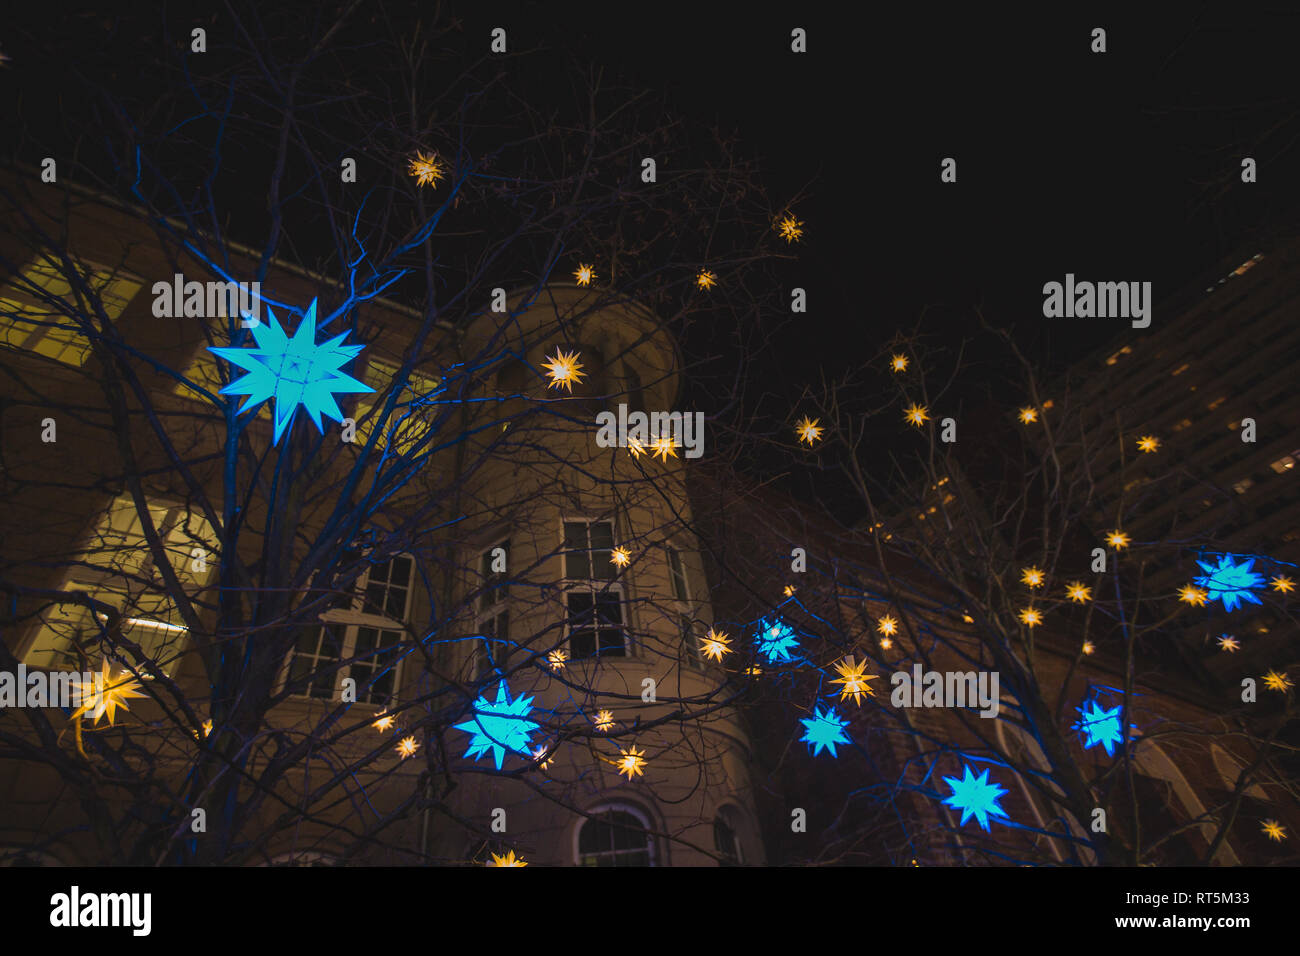 Germany, Berlin, Christmas decoration, Moravian stars hanging in trees Stock Photo